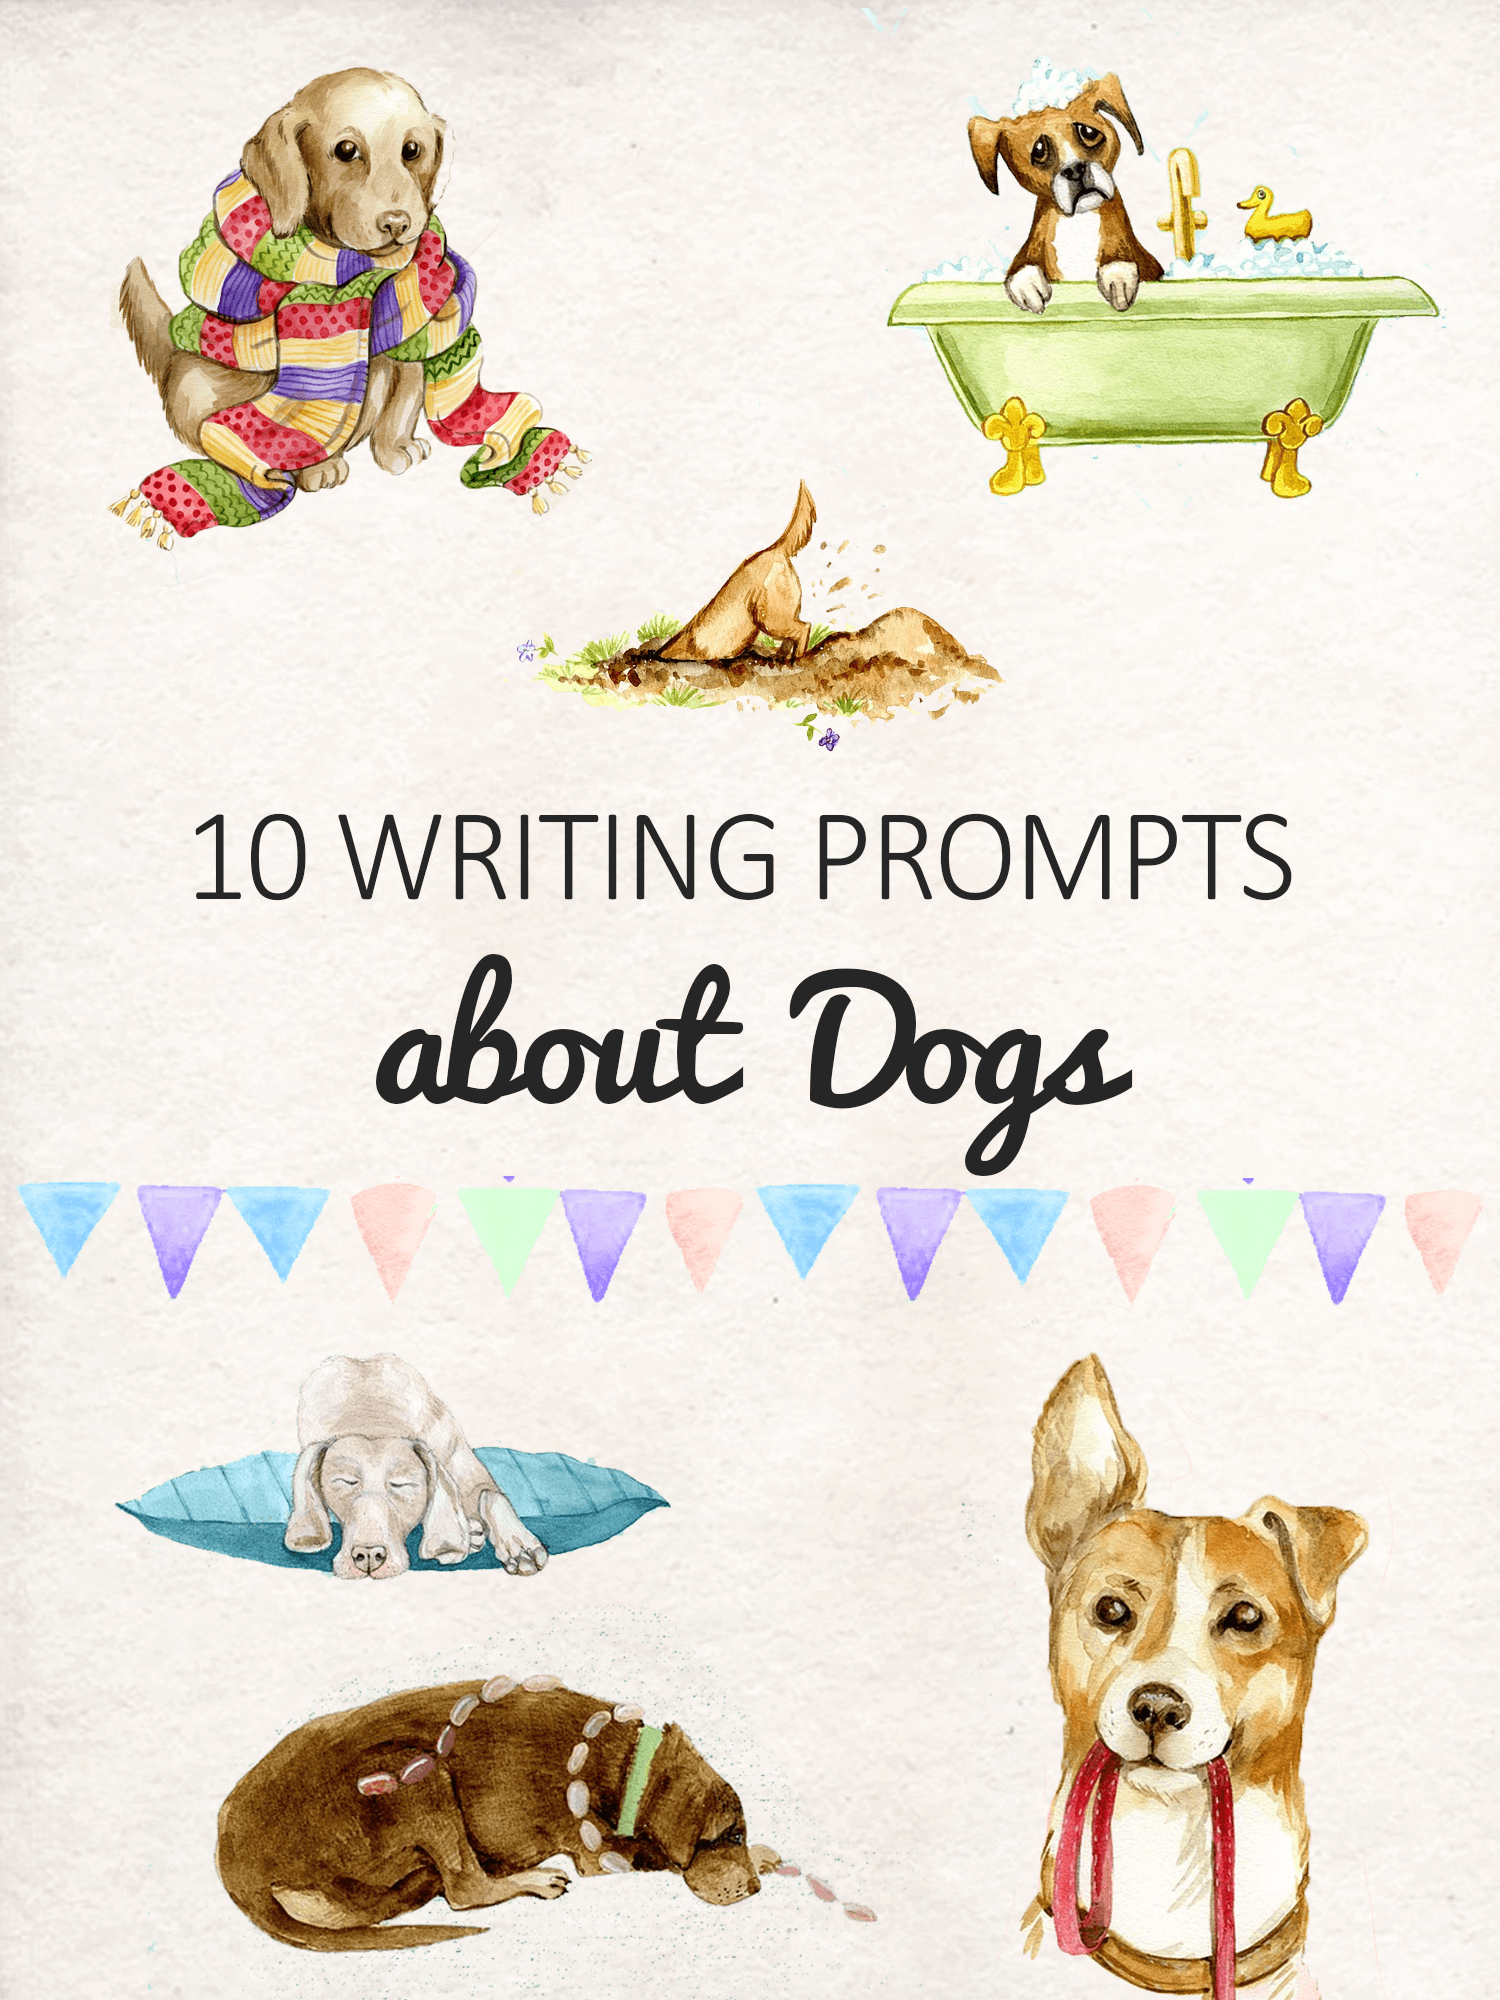 10 Writing Prompts about dogs for kids _imagine forest